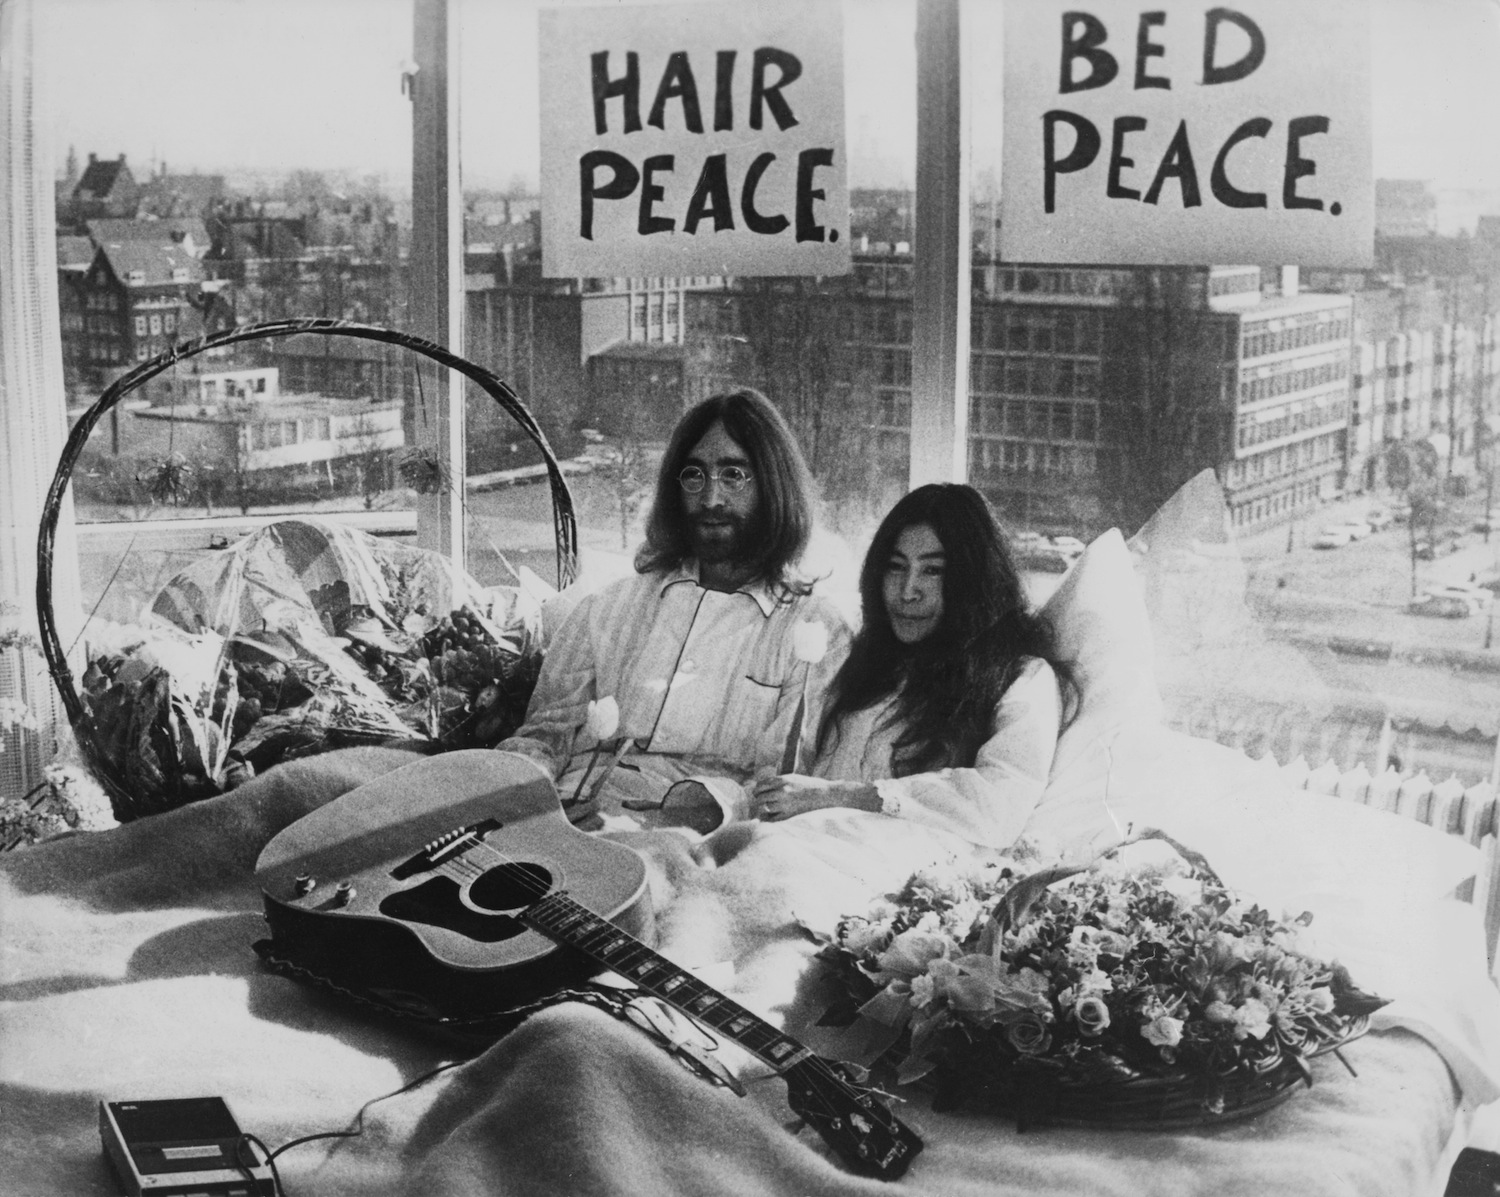 Beatle John Lennon (1940 ? 1980) and his wife of a week Yoko Ono in their bed in the Presidential Suite of the Hilton Hotel, 